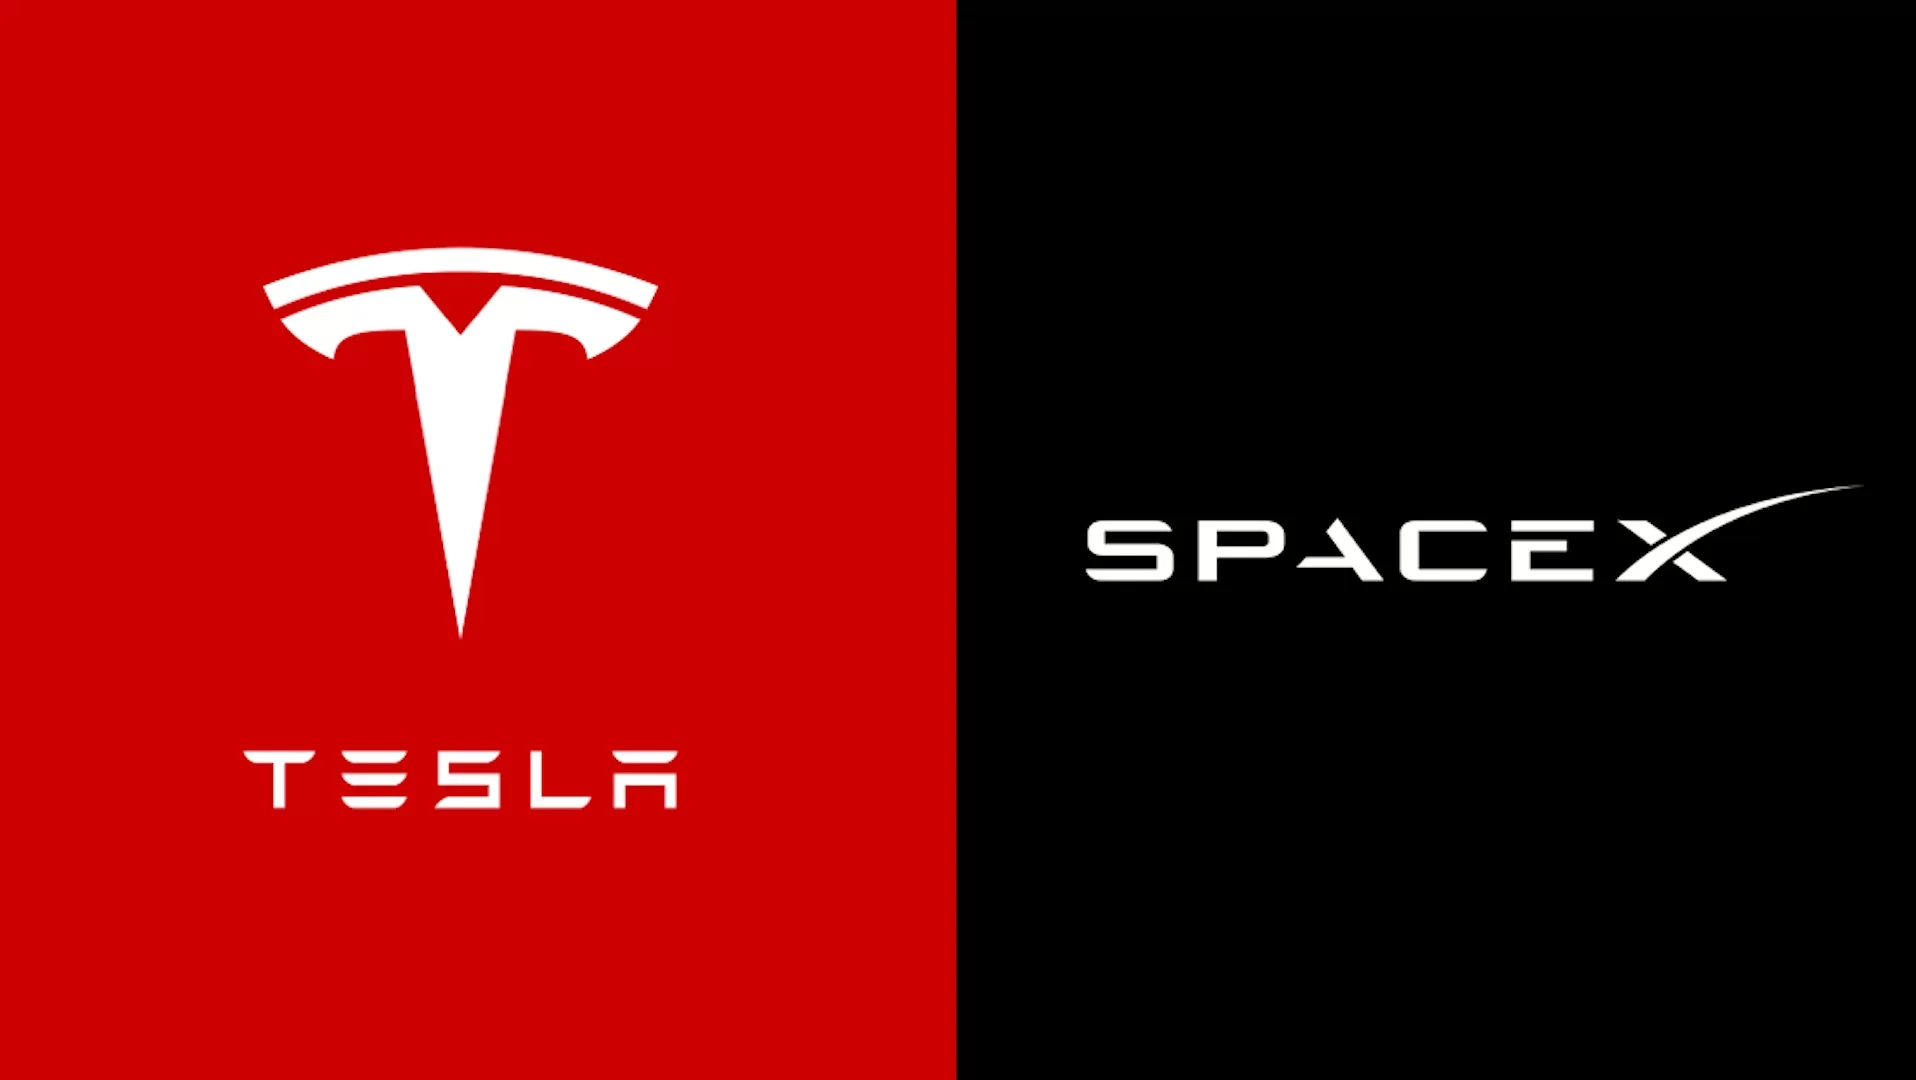 Tesla and SpaceX